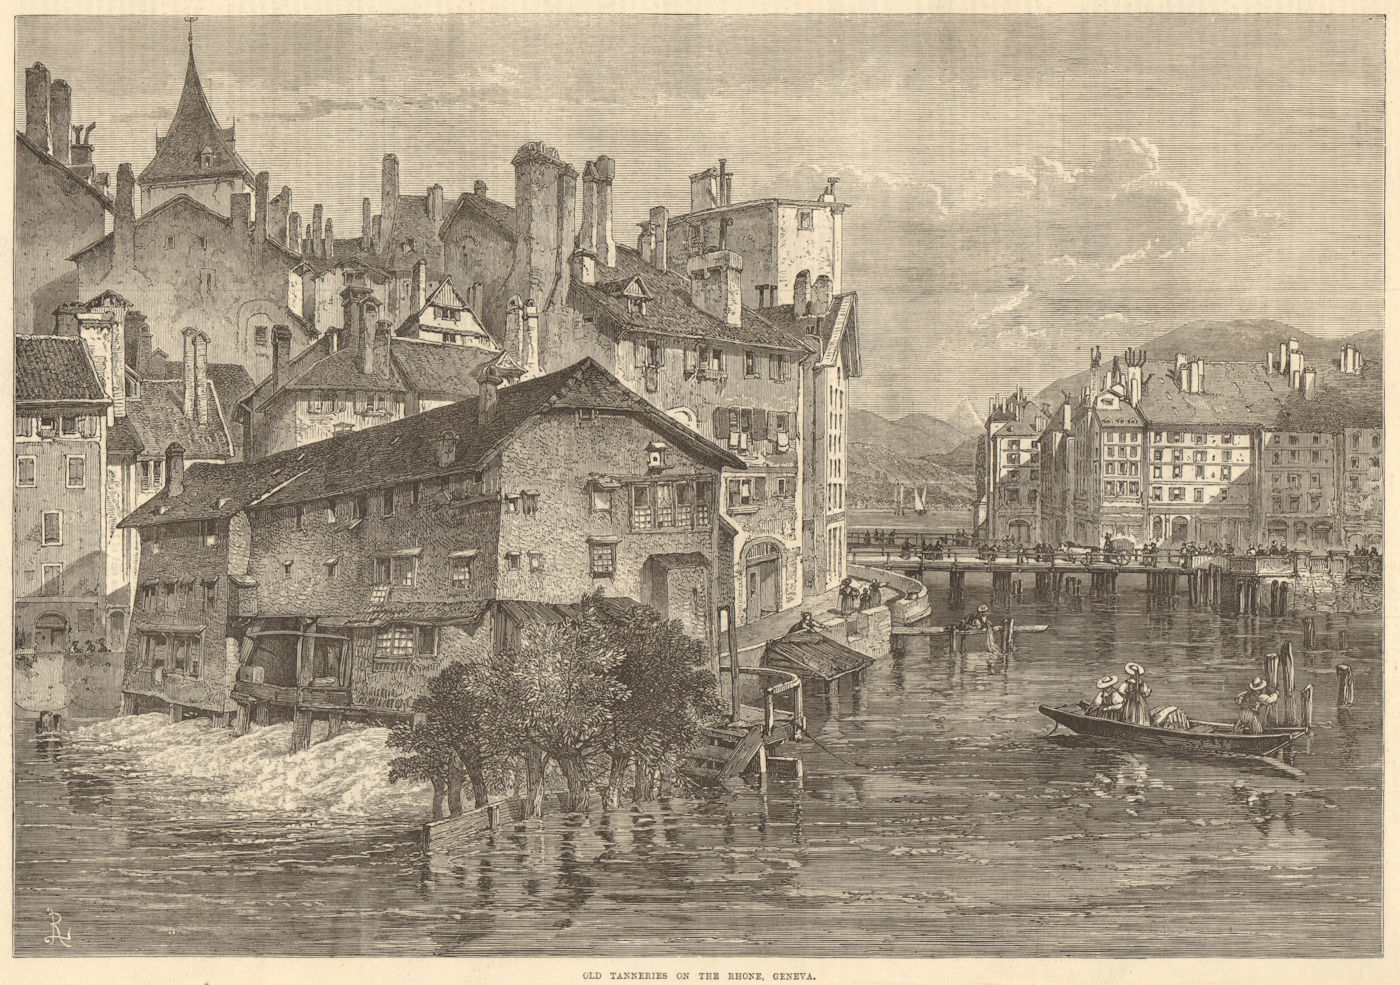 Associate Product Old tanneries on the Rhone, Geneva. Switzerland. Leather 1871 antique ILN page